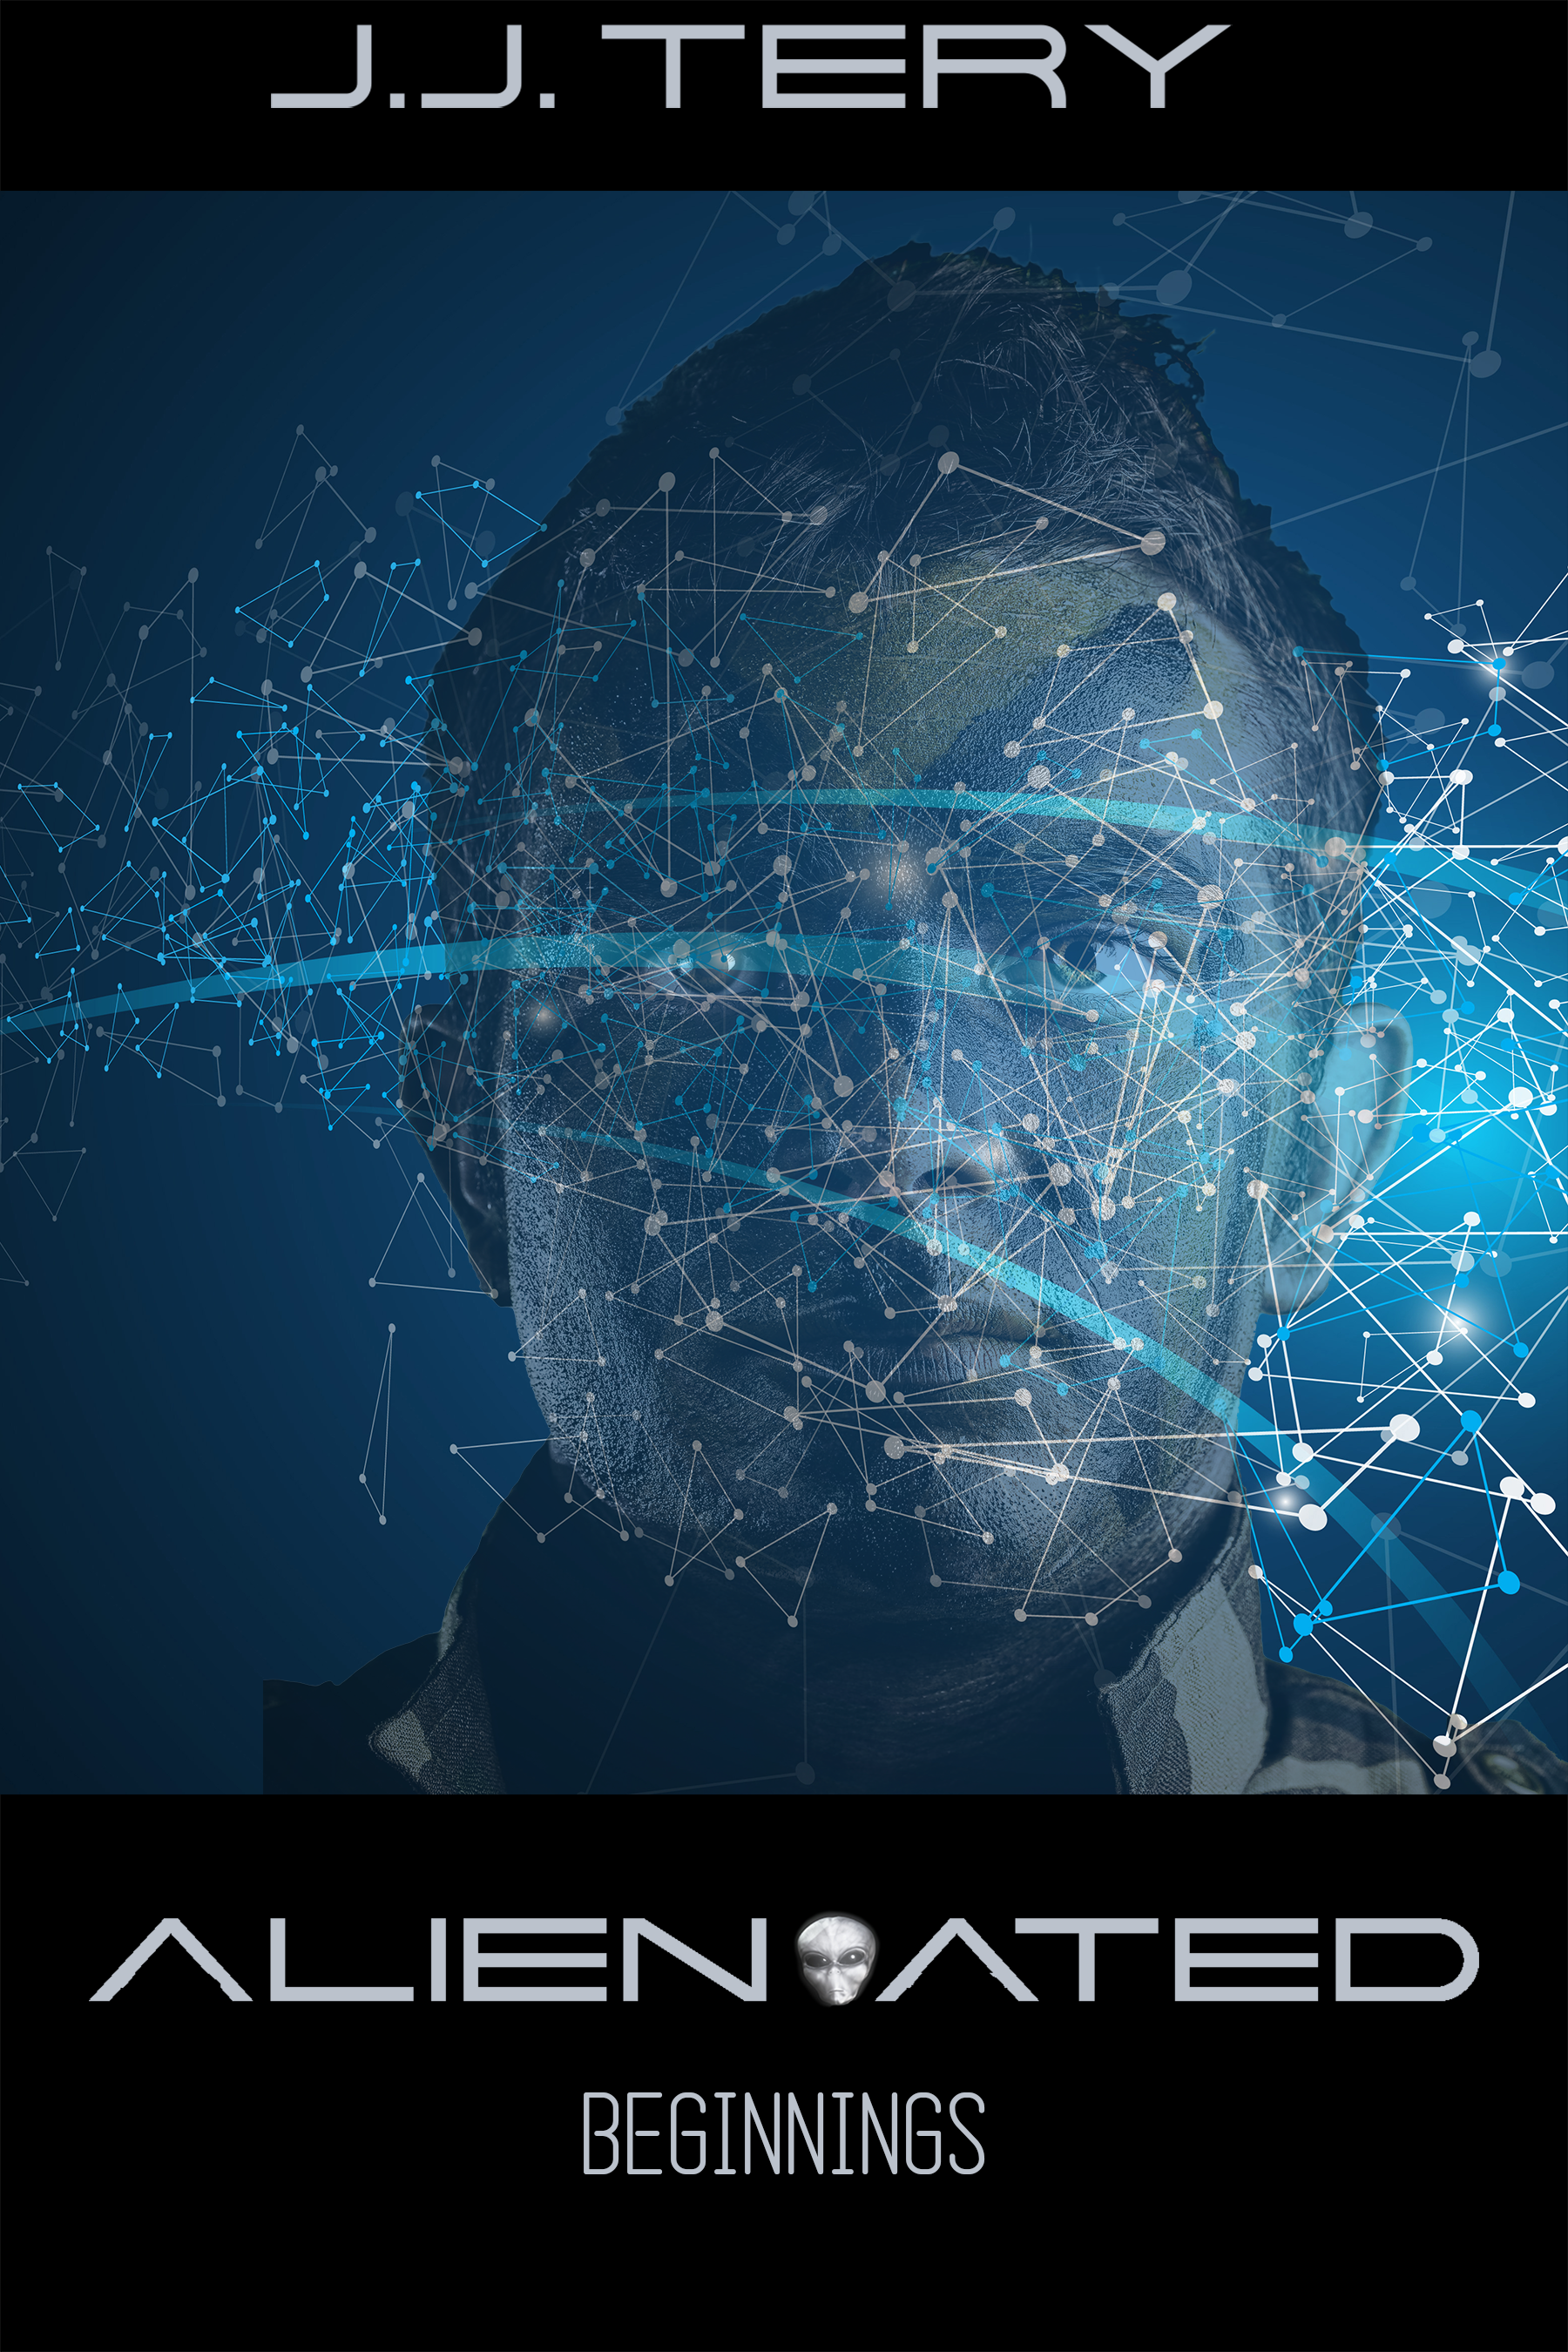 Alien-ated Cover Image